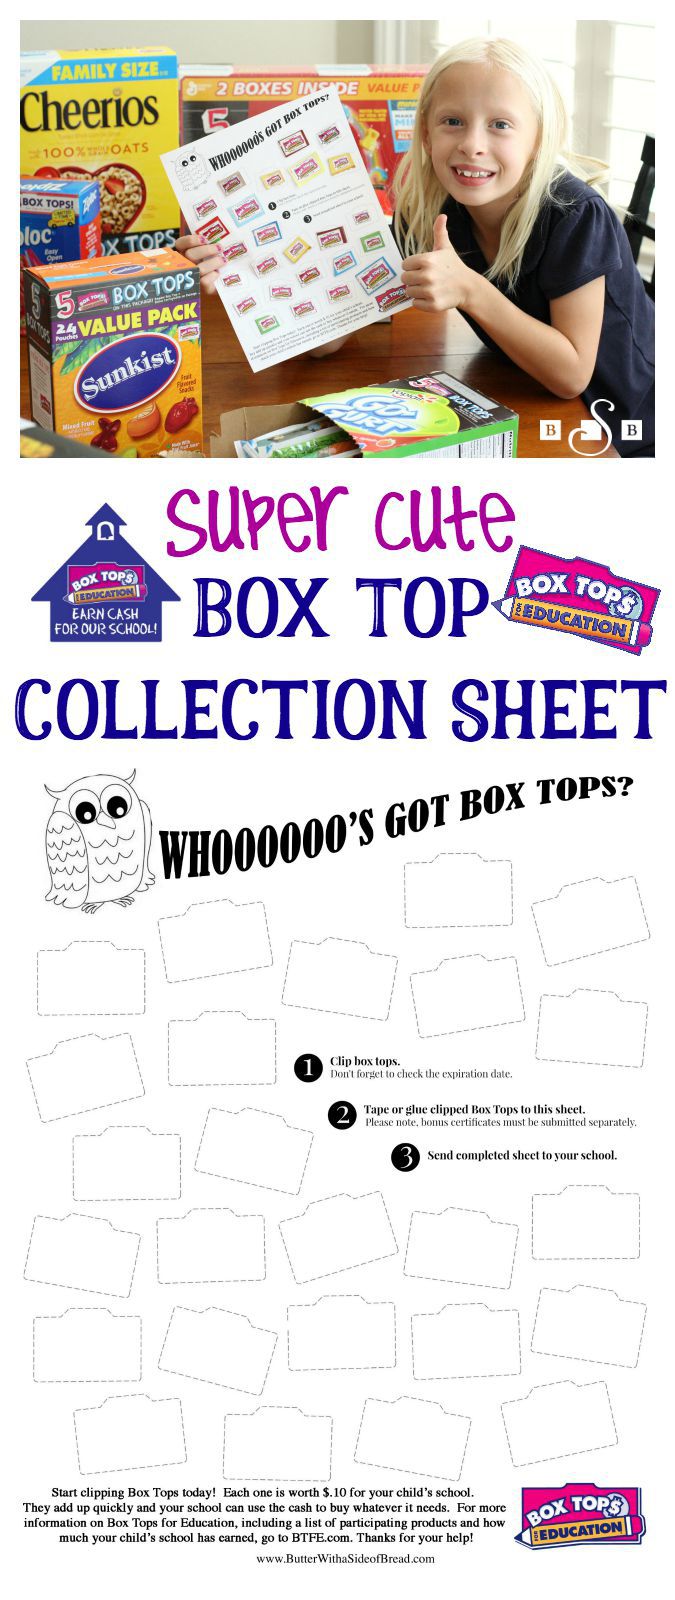 Super Cute Owl Box Top Collection Sheet - Butter With A Side of Bread